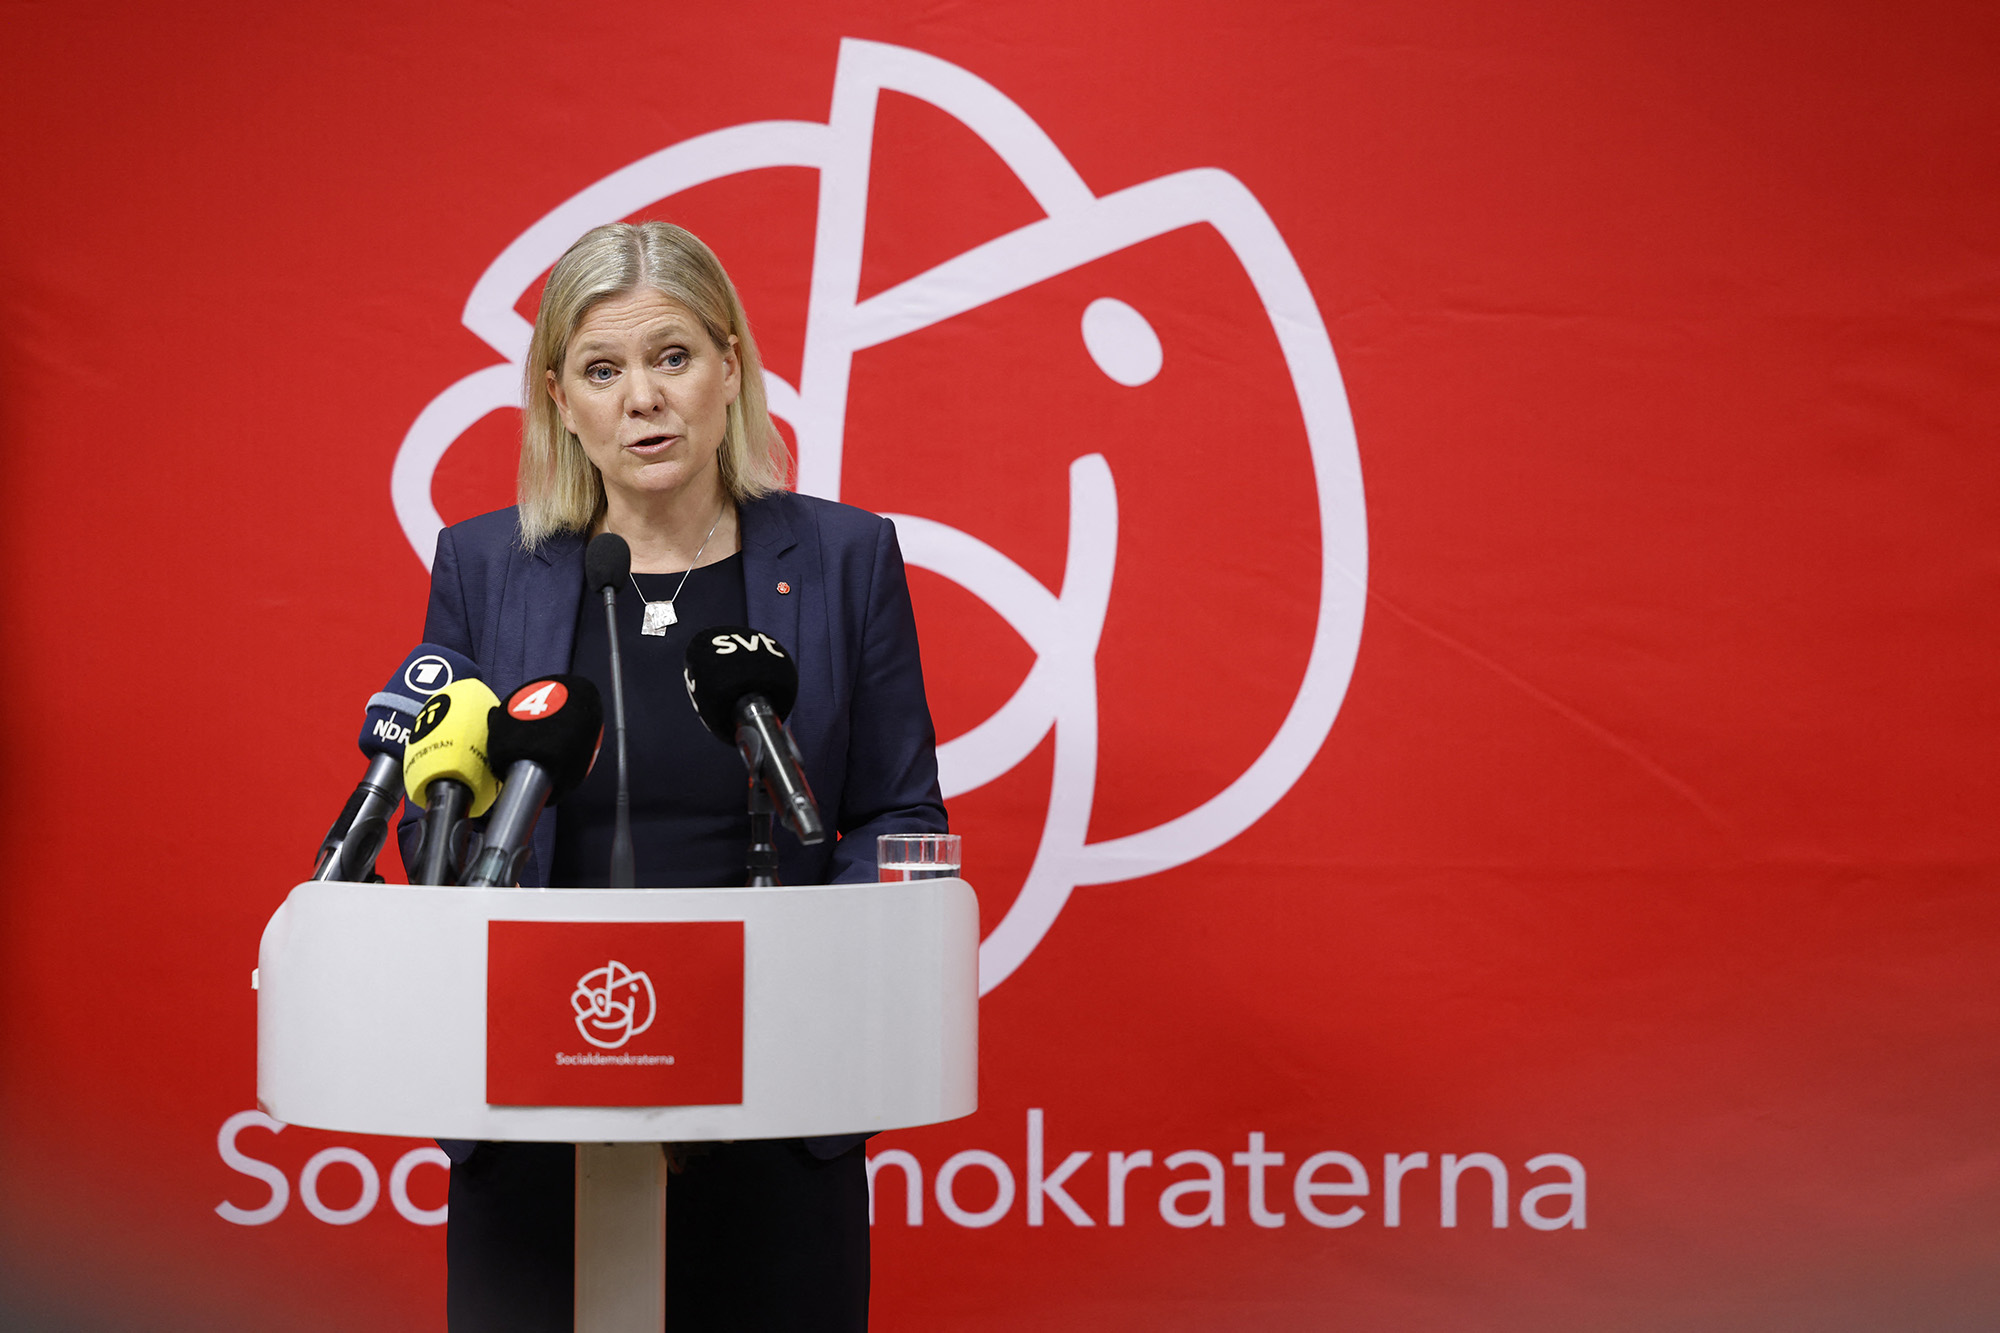 Swedish Prime Minister Magdalena Andersson gives a press conference on May 15 after a meeting at the headquarters of the ruling Social Democratic Party in Stockholm, Sweden.